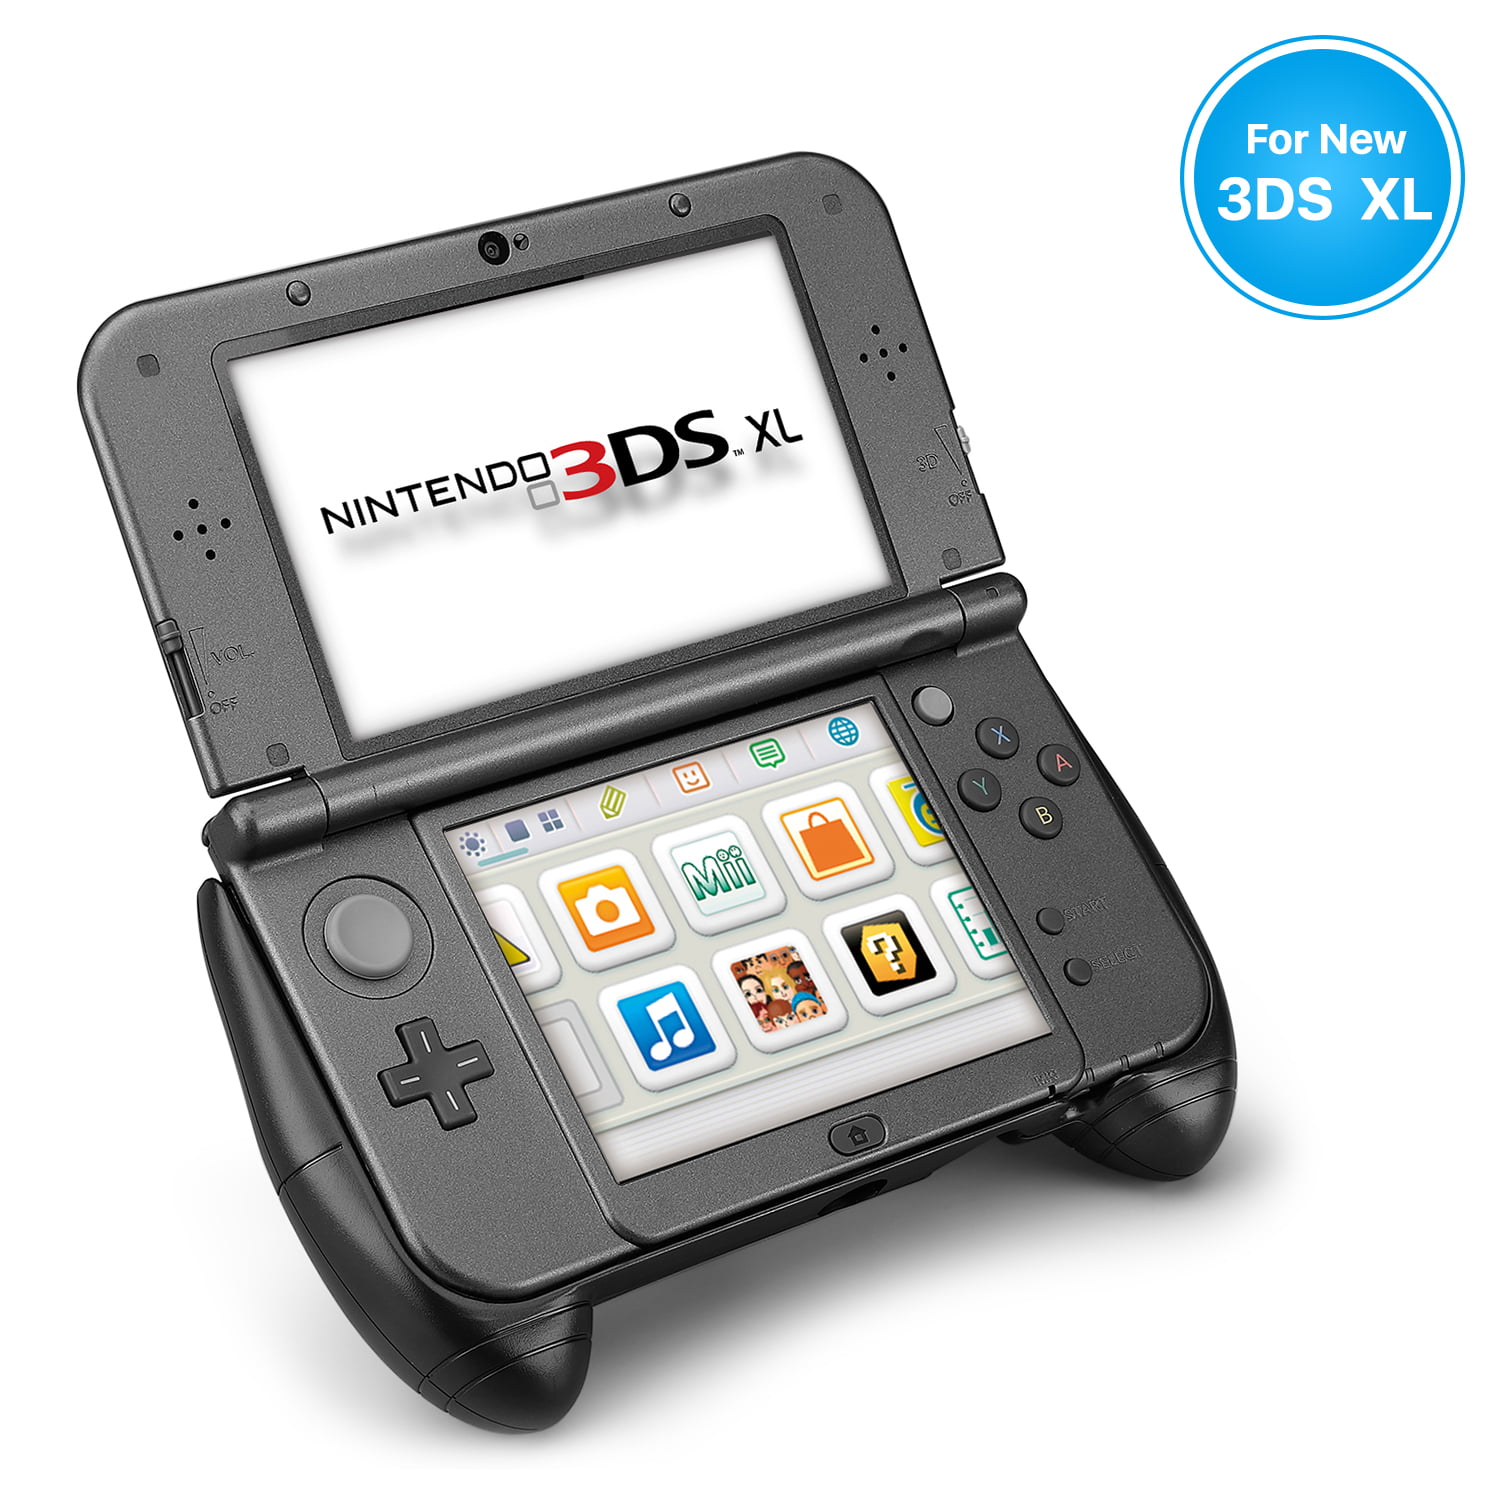 New Nintendo 3DS XL Hand Grip Protective Cover Skin Rubber Controller Grip Case Ergonomic